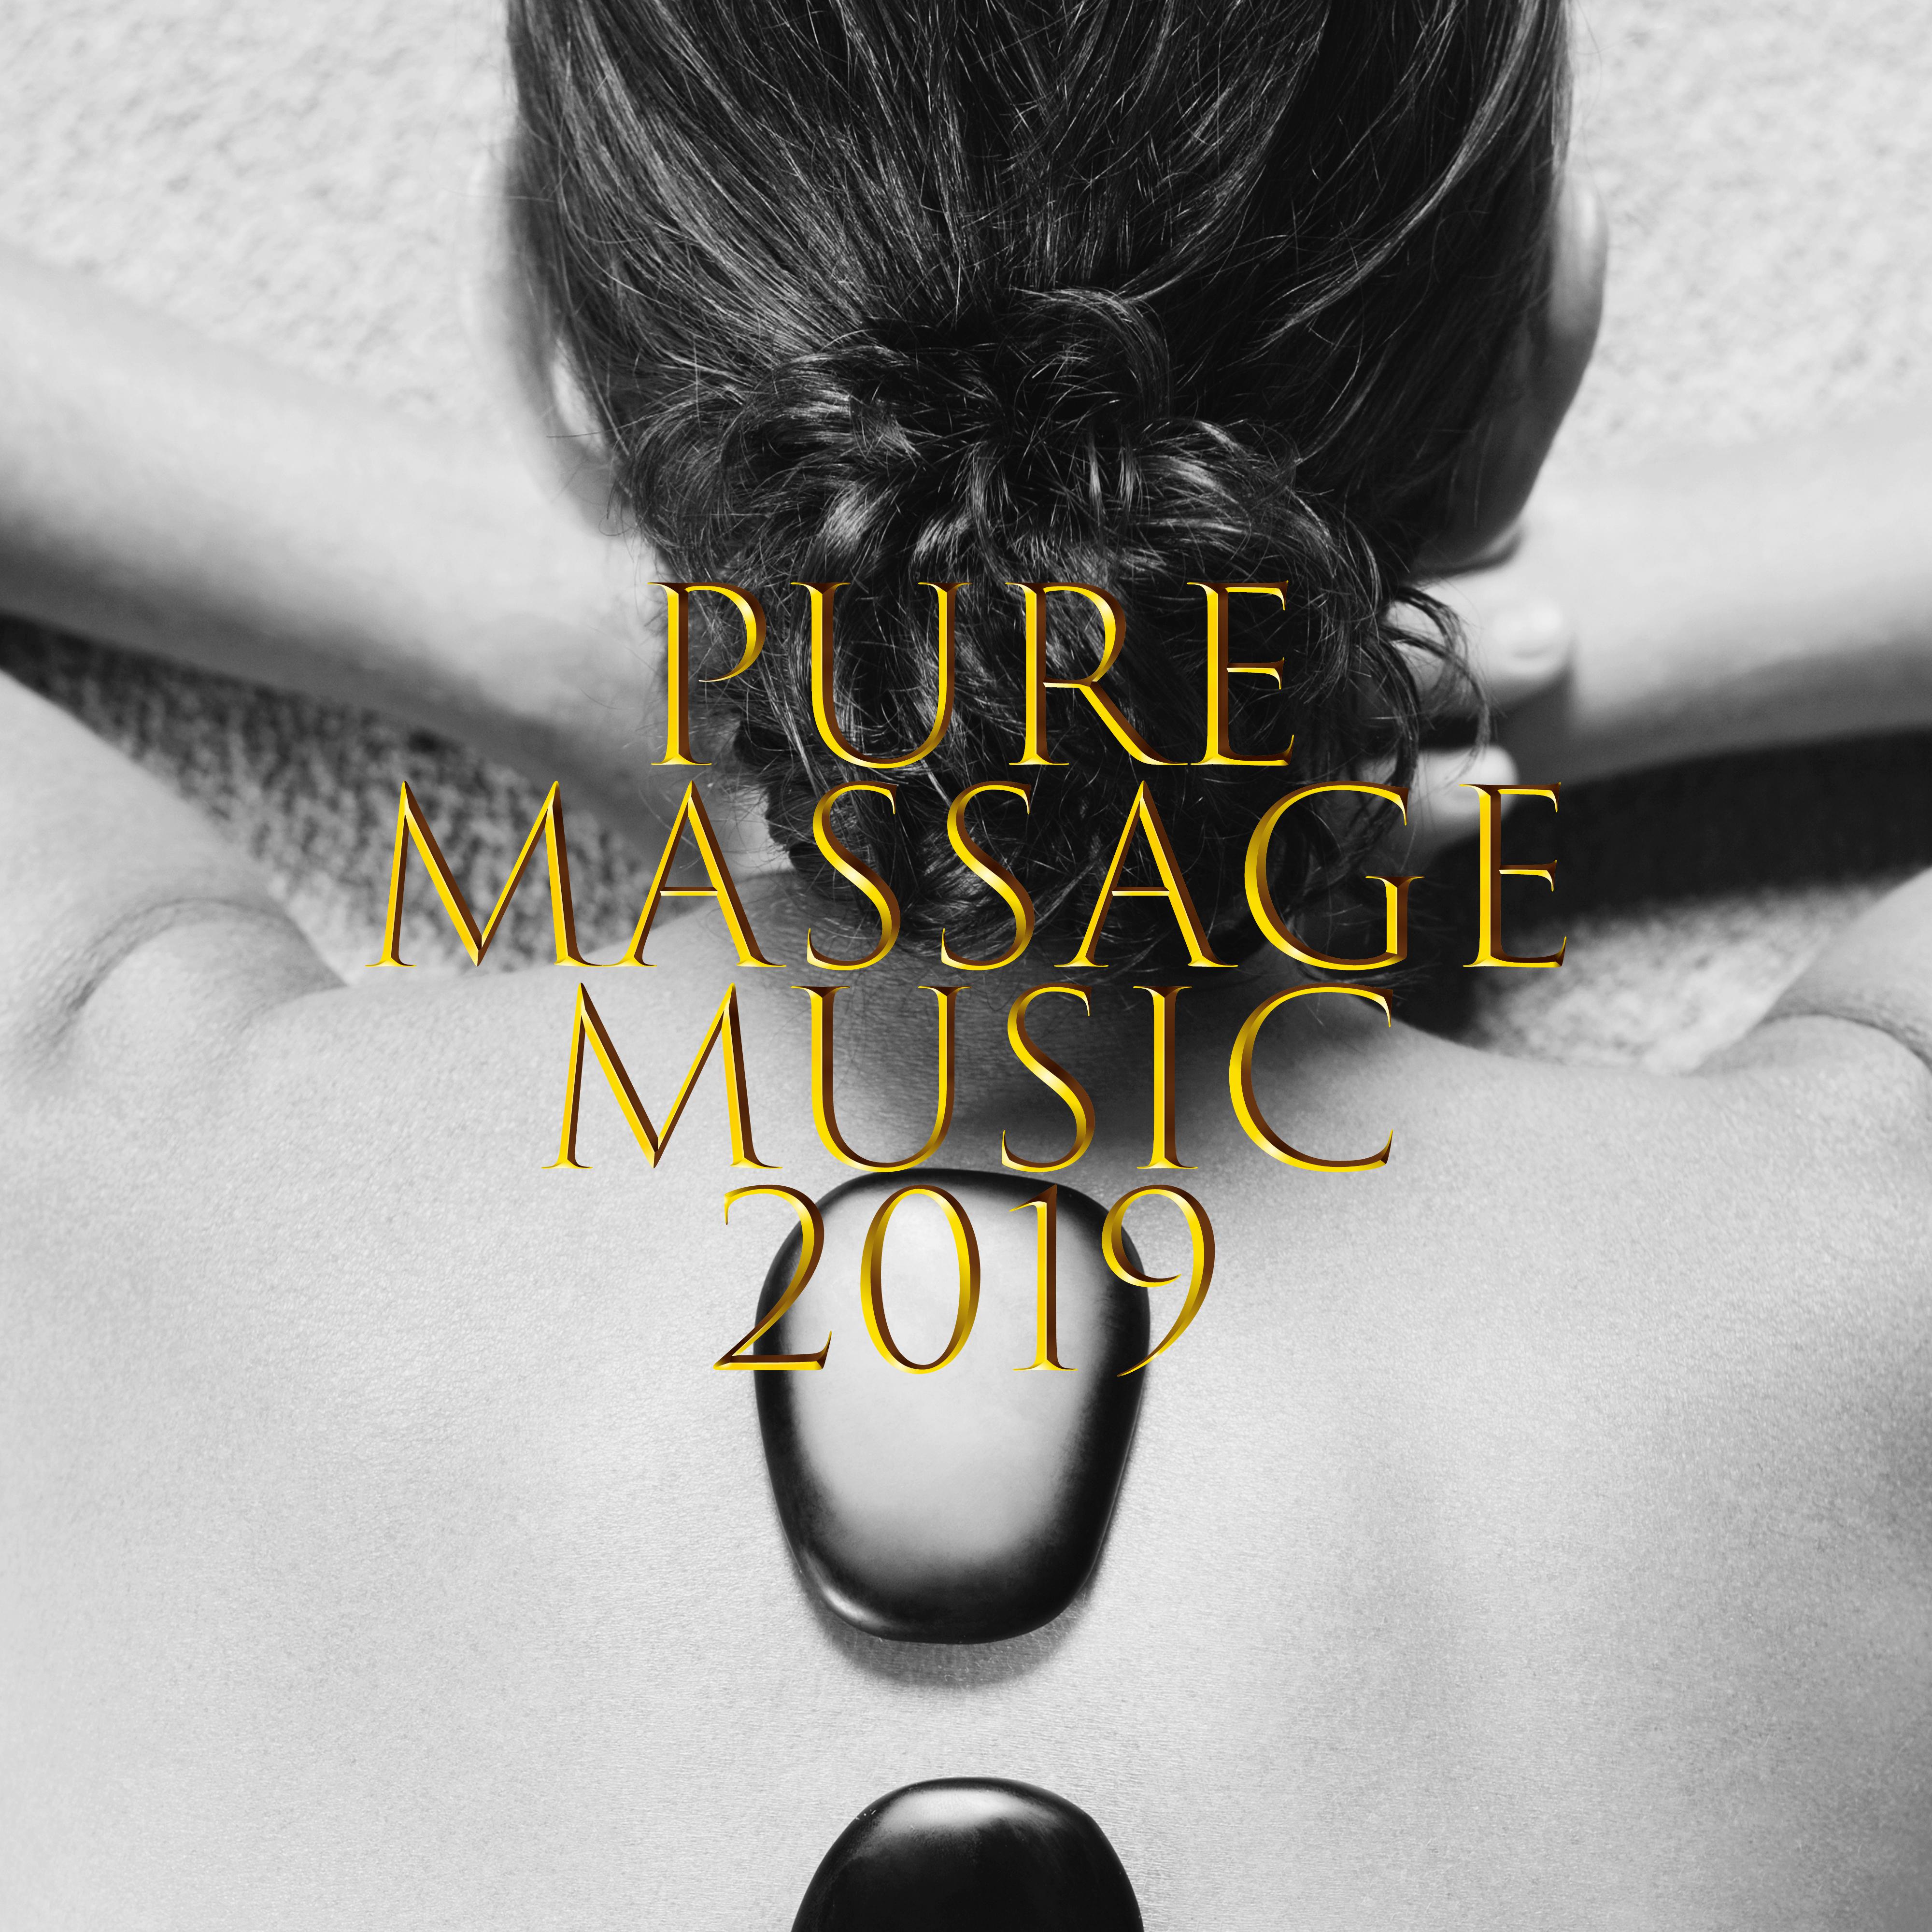 Pure Massage Music 2019: 15 New Age Soothing Songs for Full Relaxation & Healing, Stress Relief & Calming Down